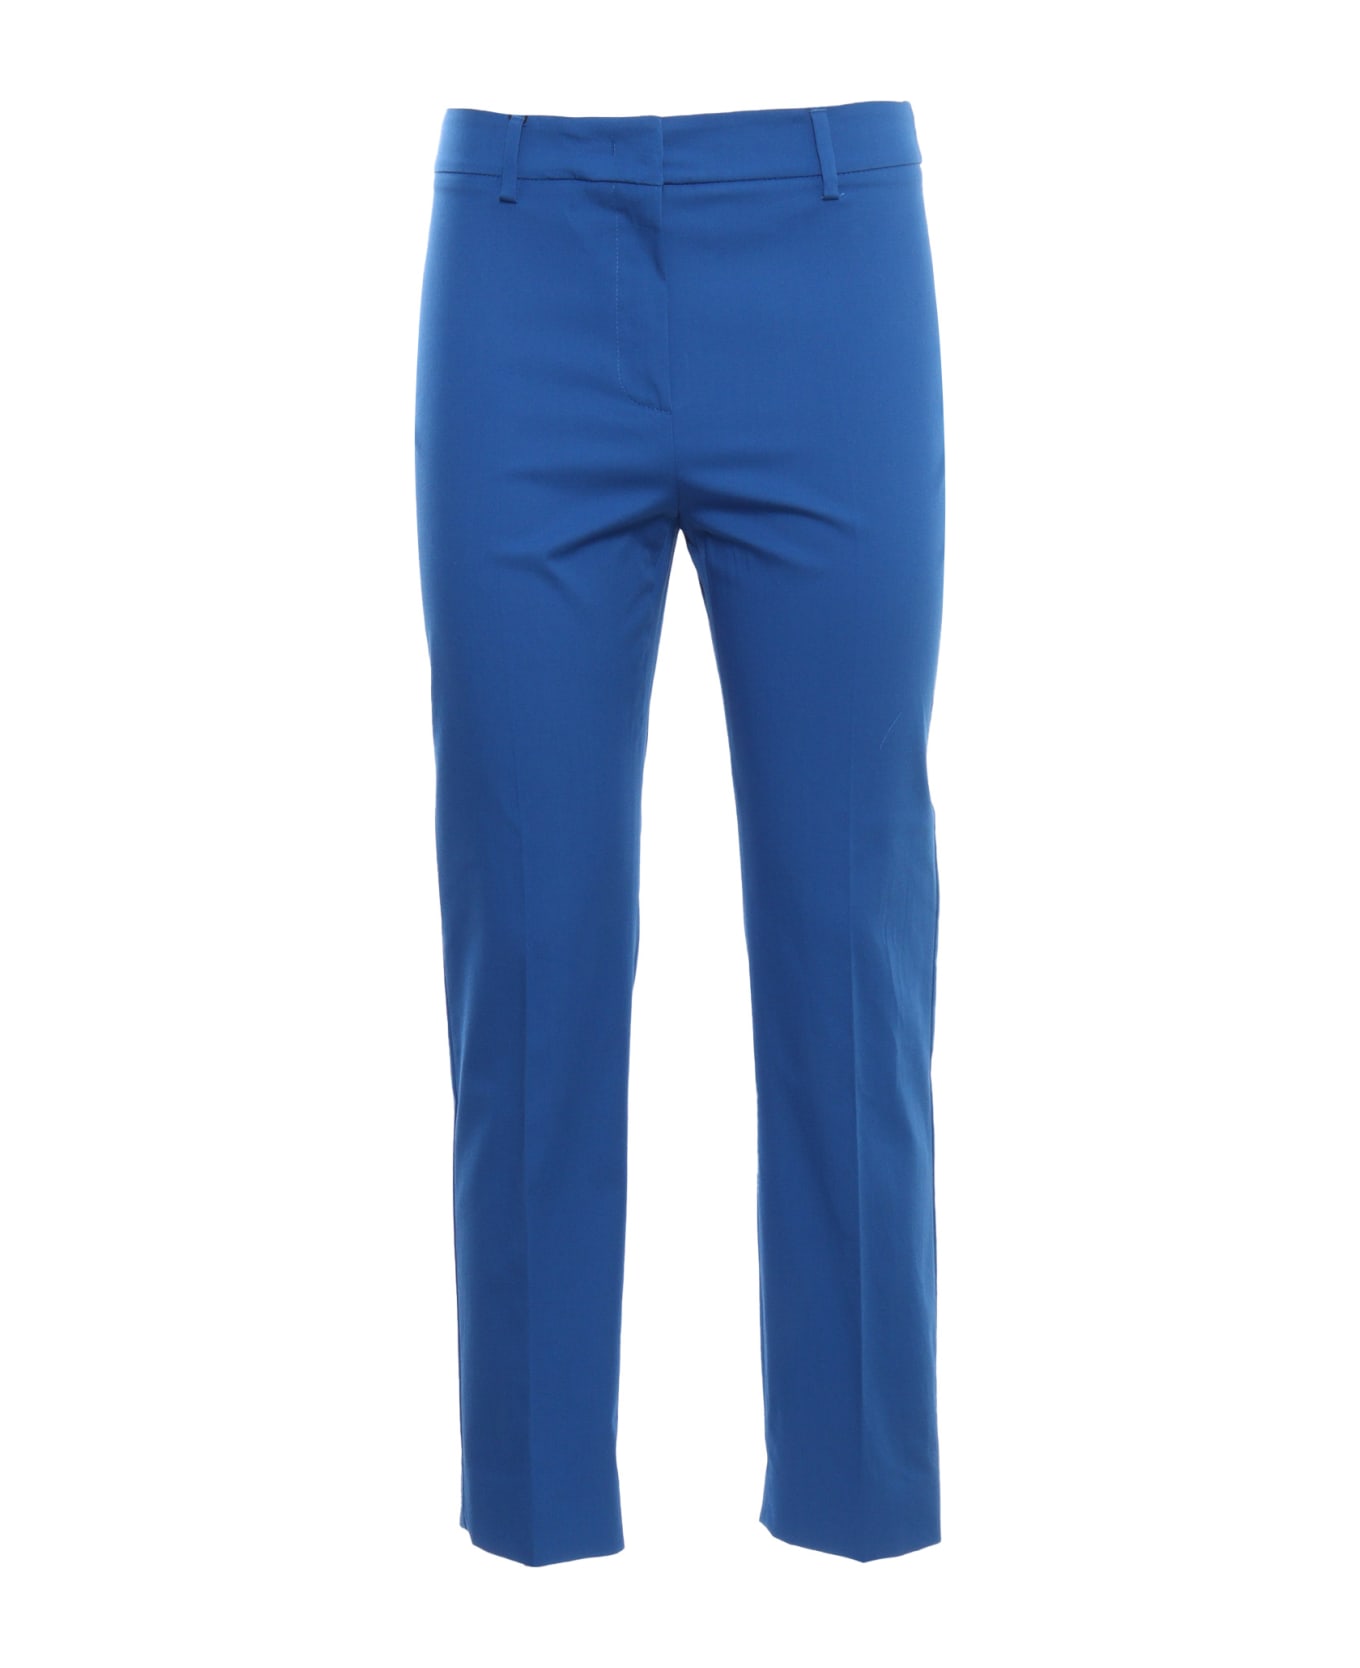 Weekend Max Mara Cecco Electric Blue Trousers - BLUE